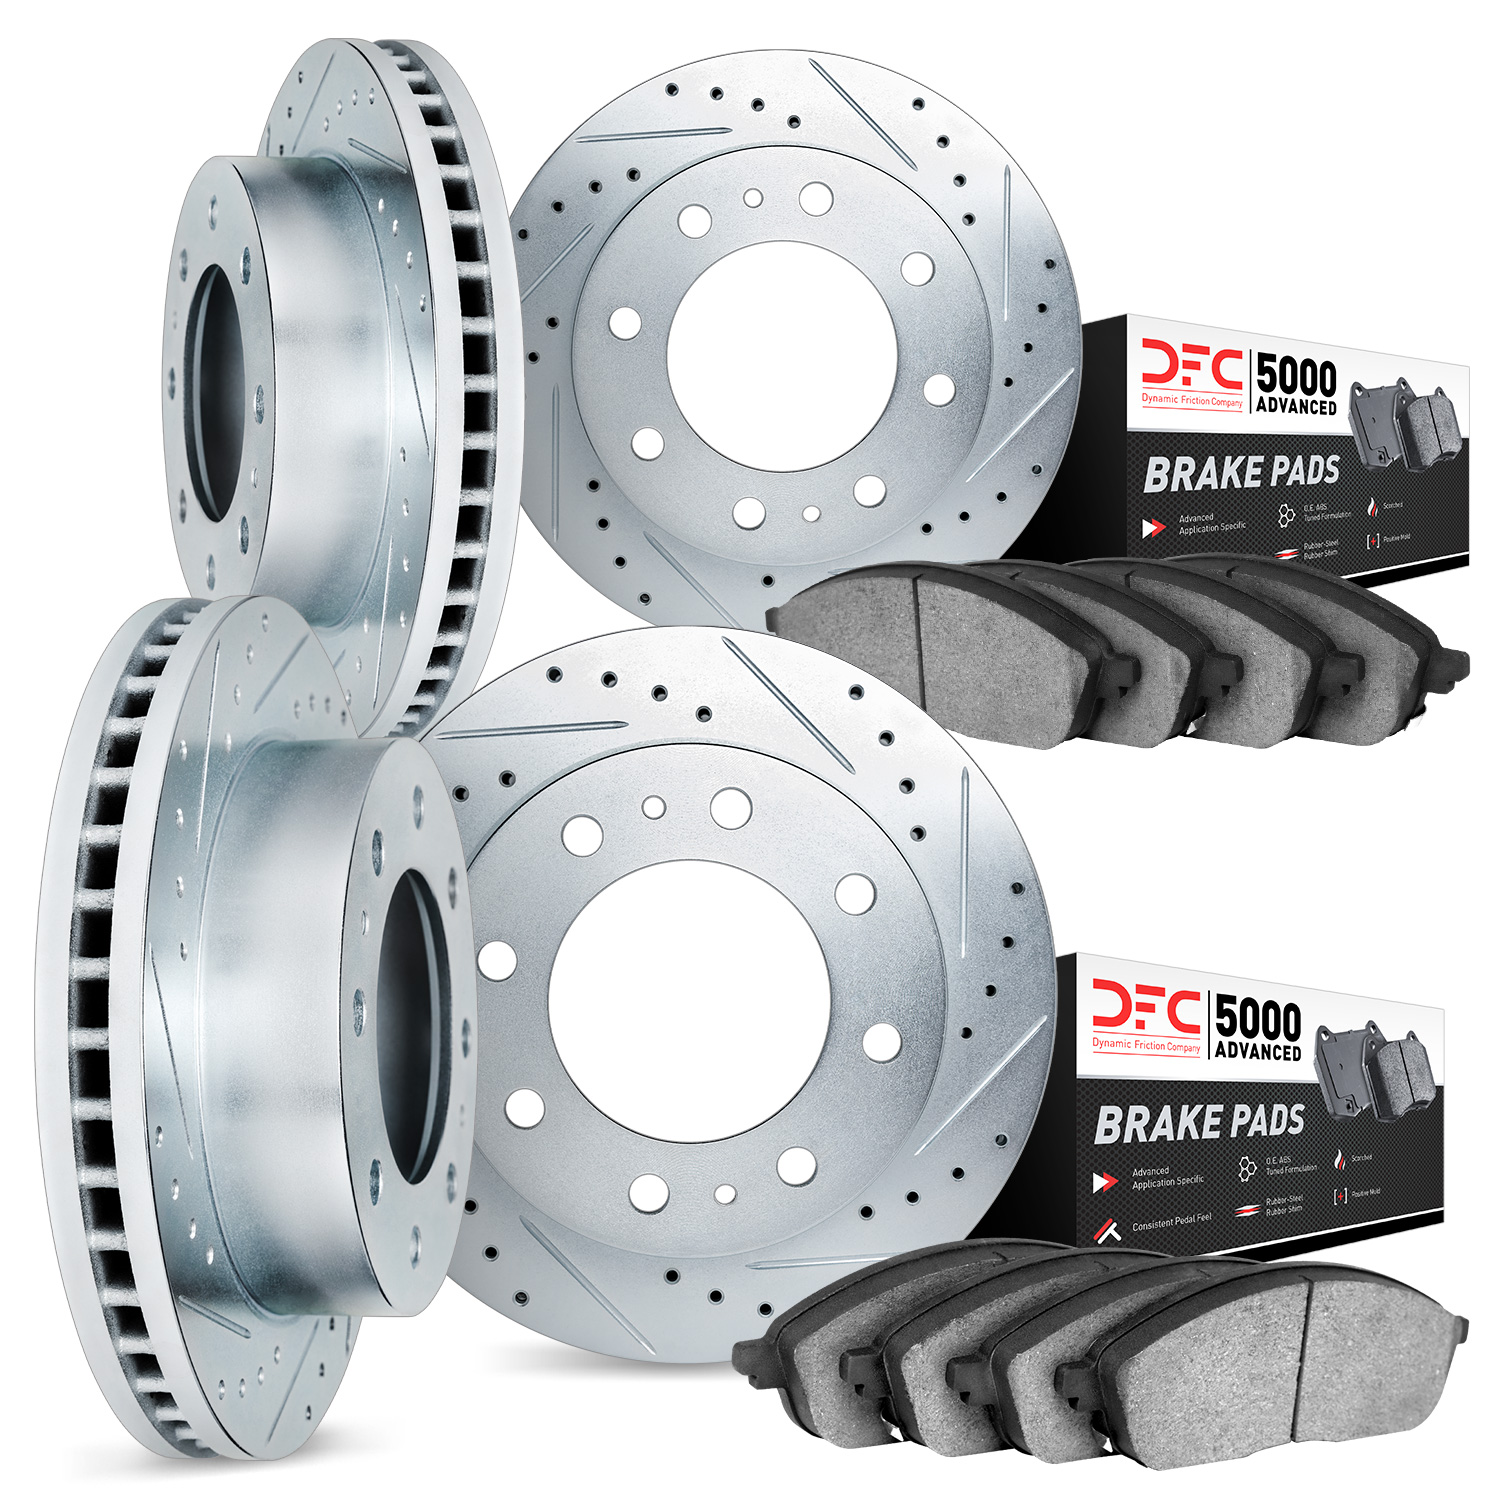 7504-48032 Drilled/Slotted Brake Rotors w/5000 Advanced Brake Pads Kit [Silver], 2003-2008 GM, Position: Front and Rear